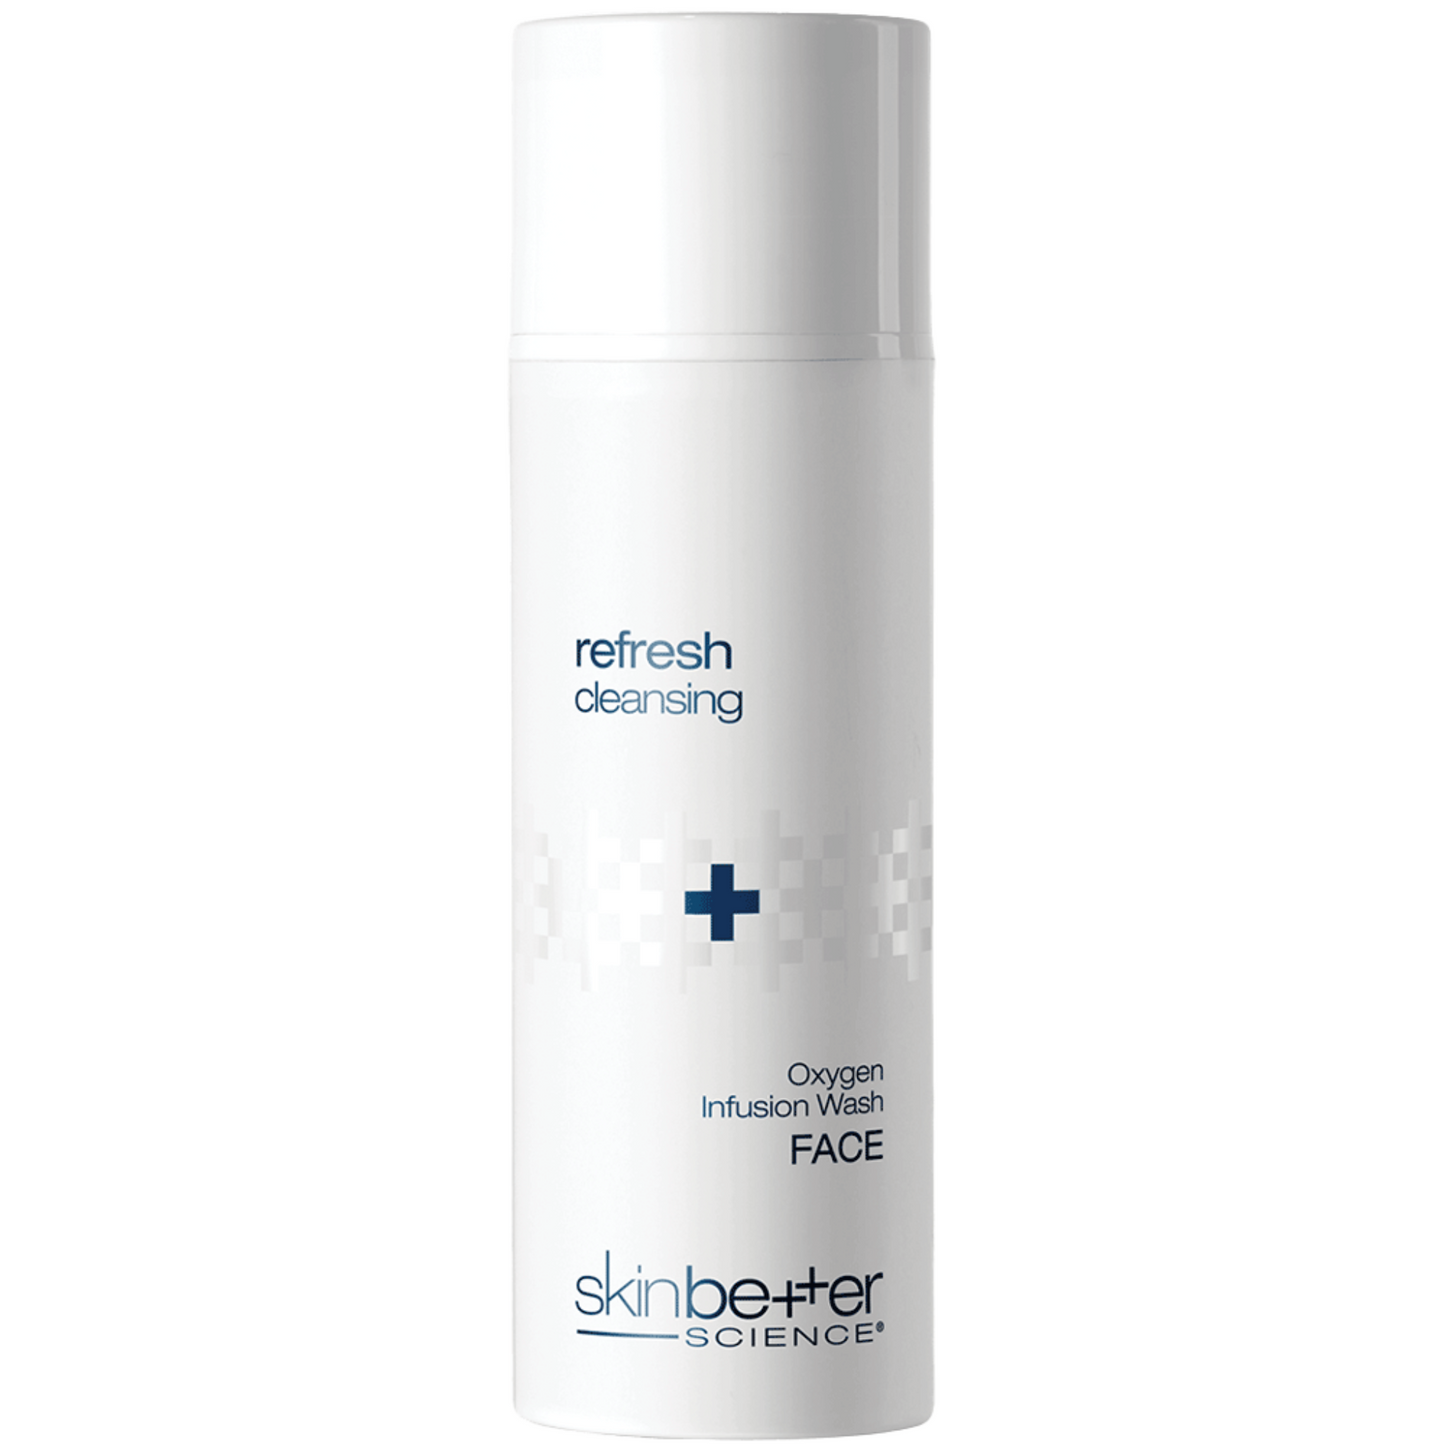 Oxygen Infusion Wash | skinbetter science®